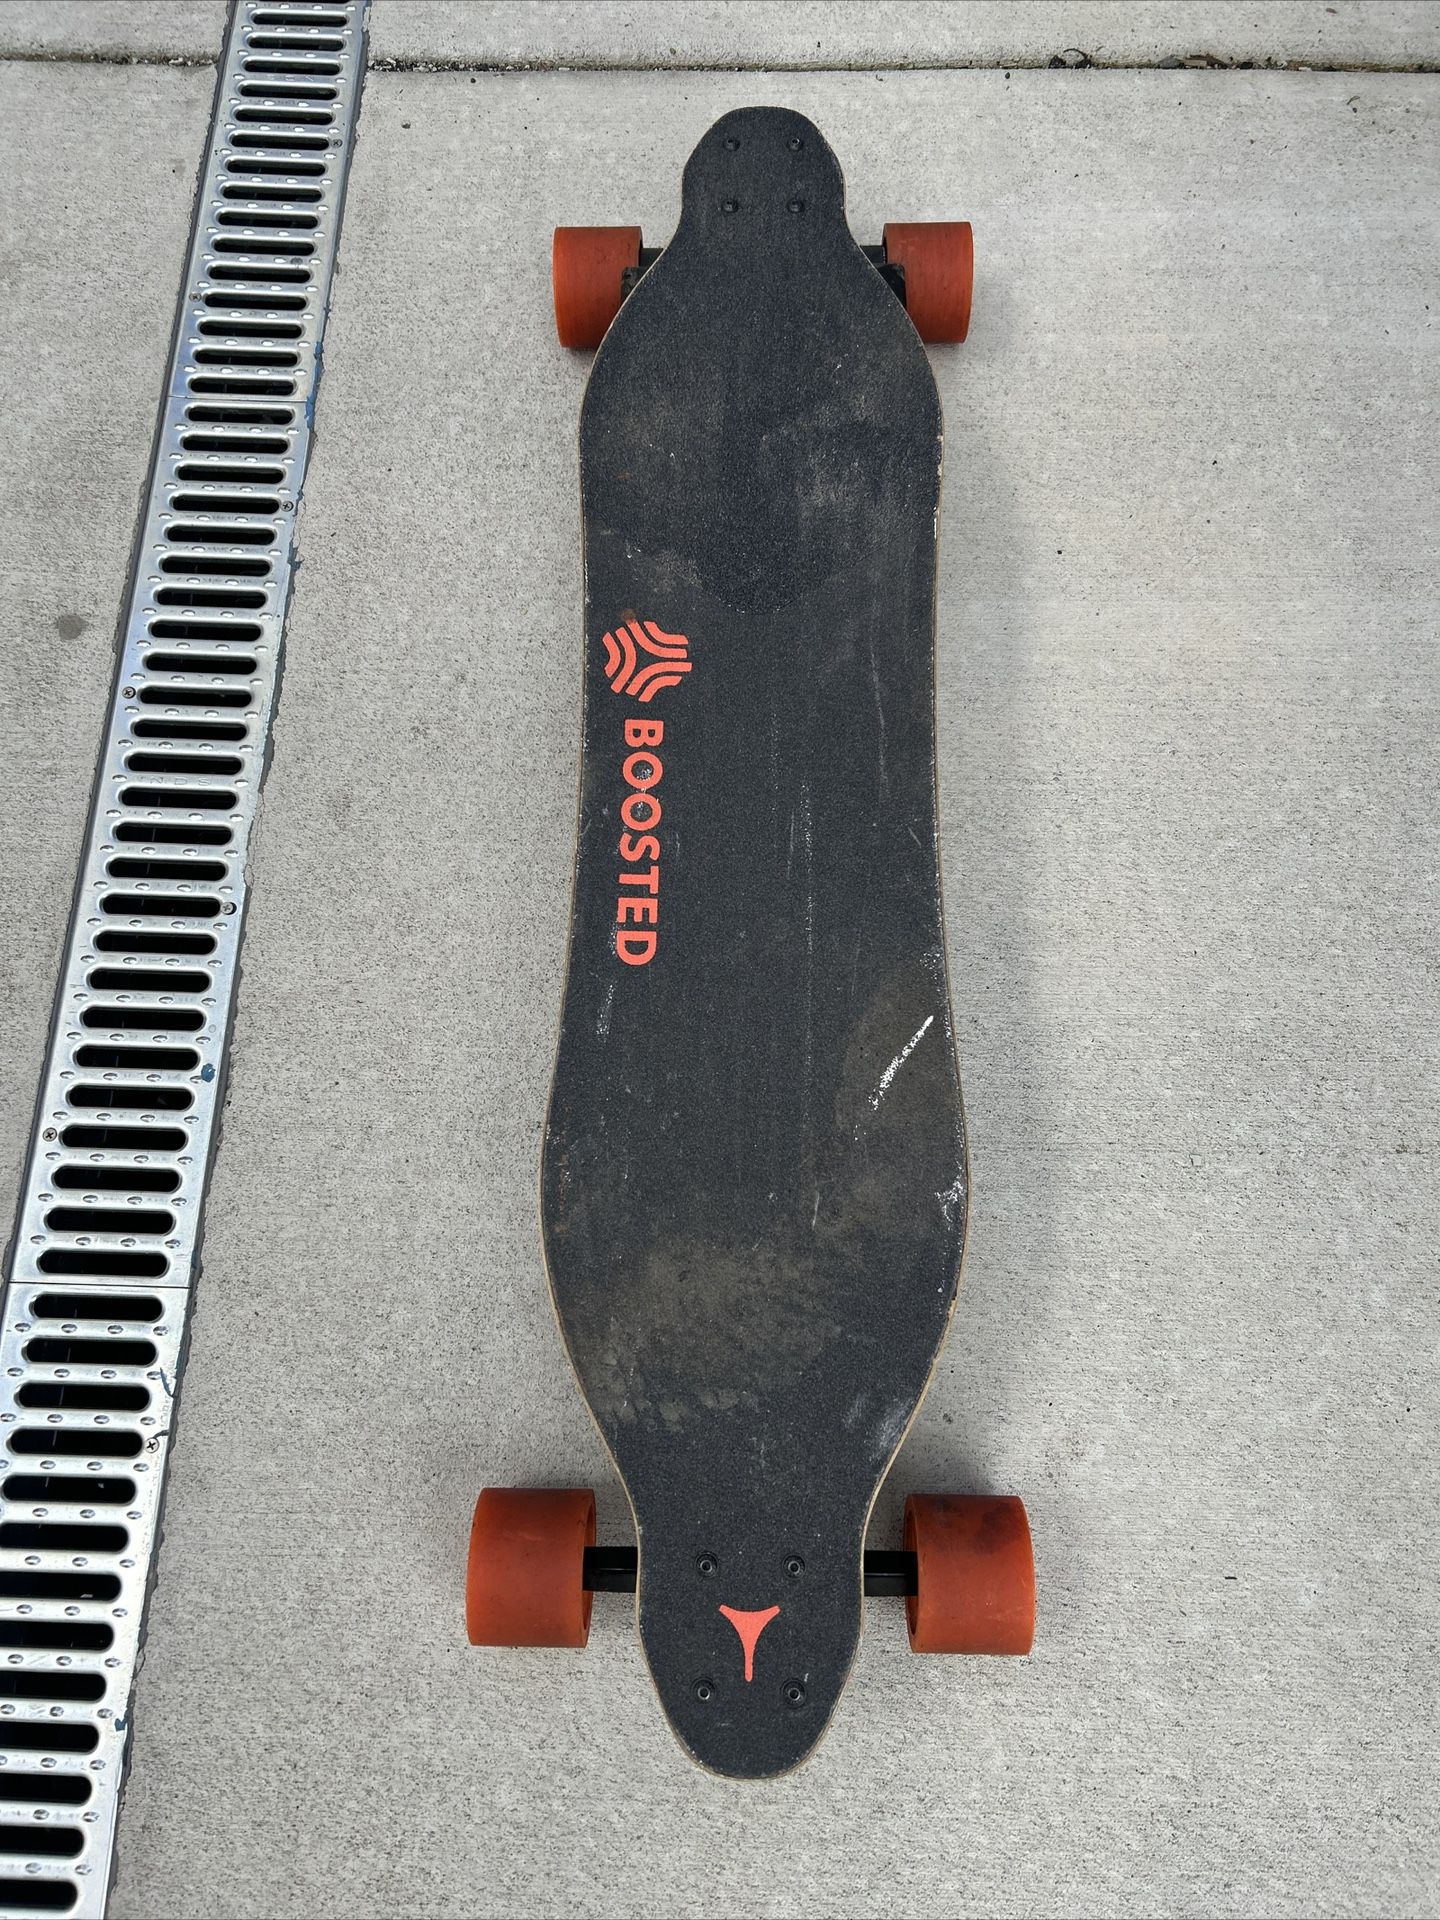 Boosted Board V1 - For Parts or Repair No Controller- No Charger